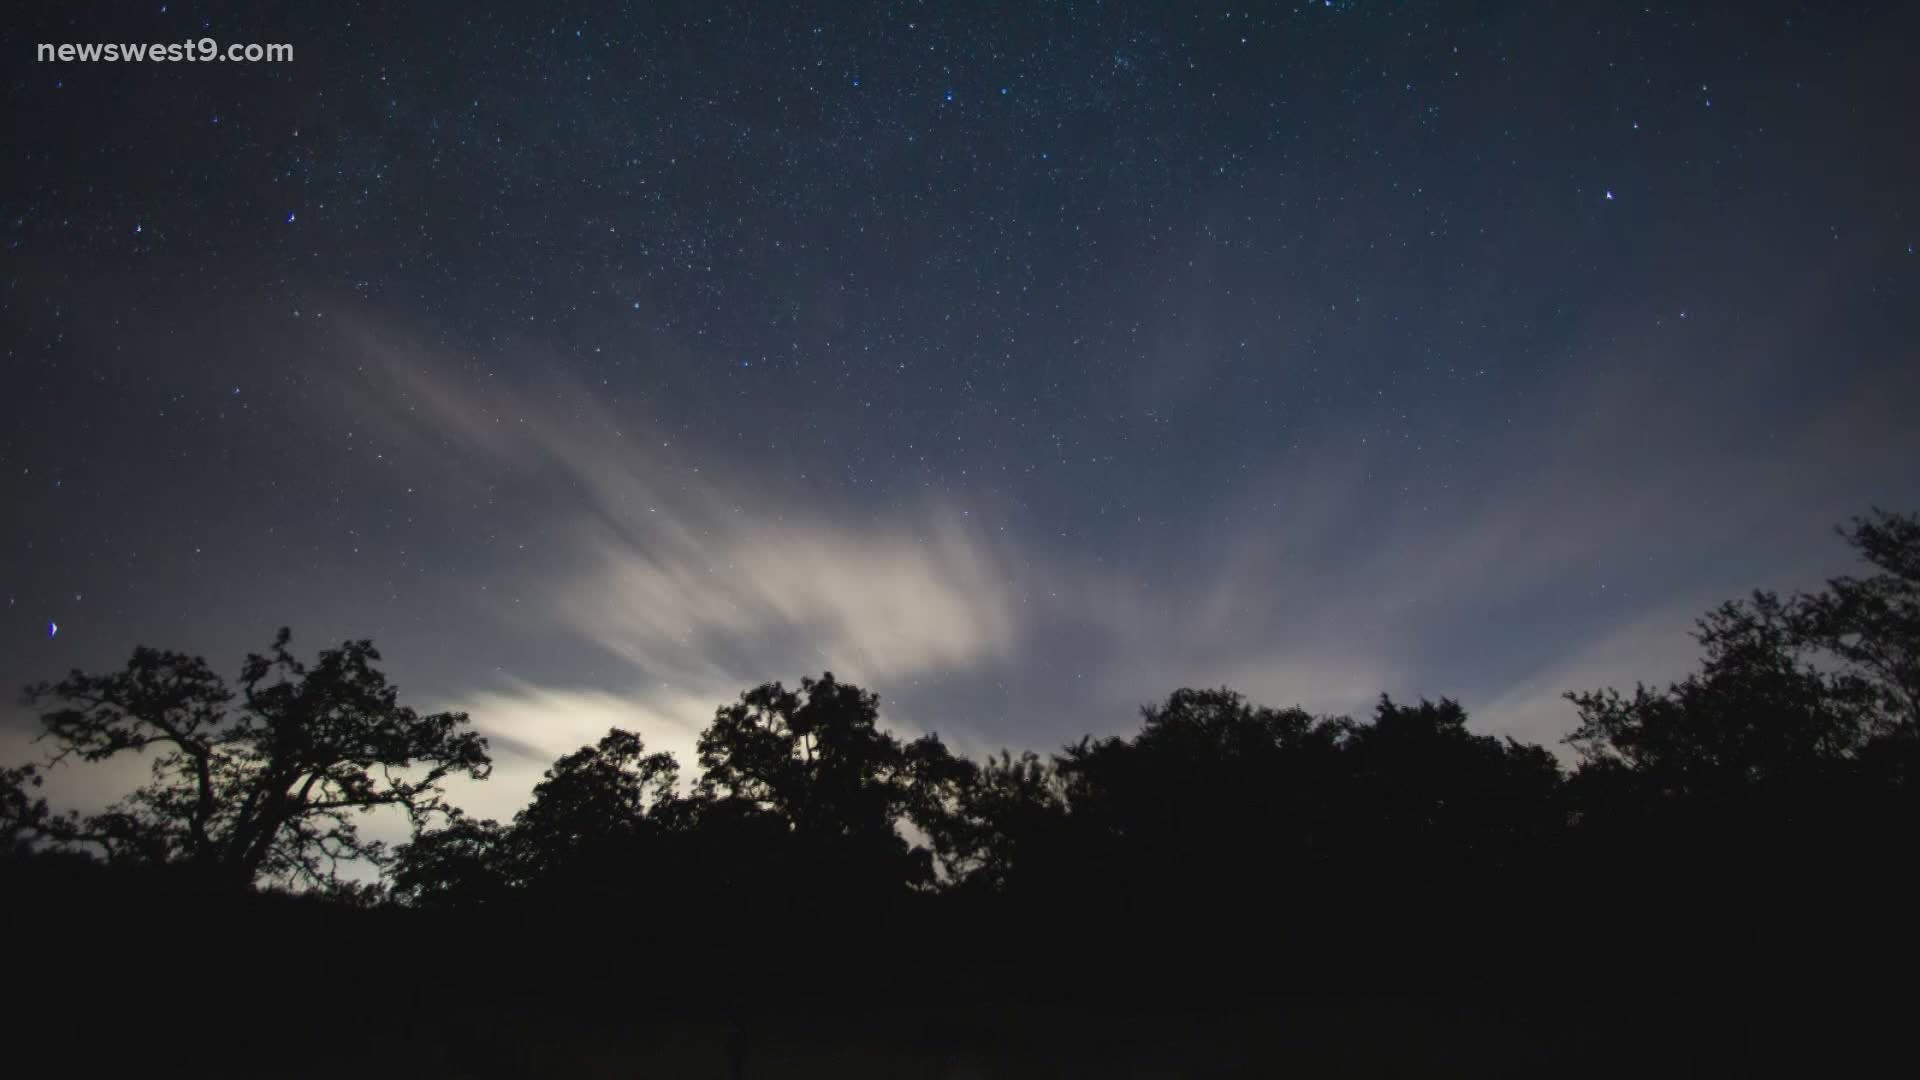 There’s a town just outside of Austin that has a full view of the Milky Way, no matter where you look up.